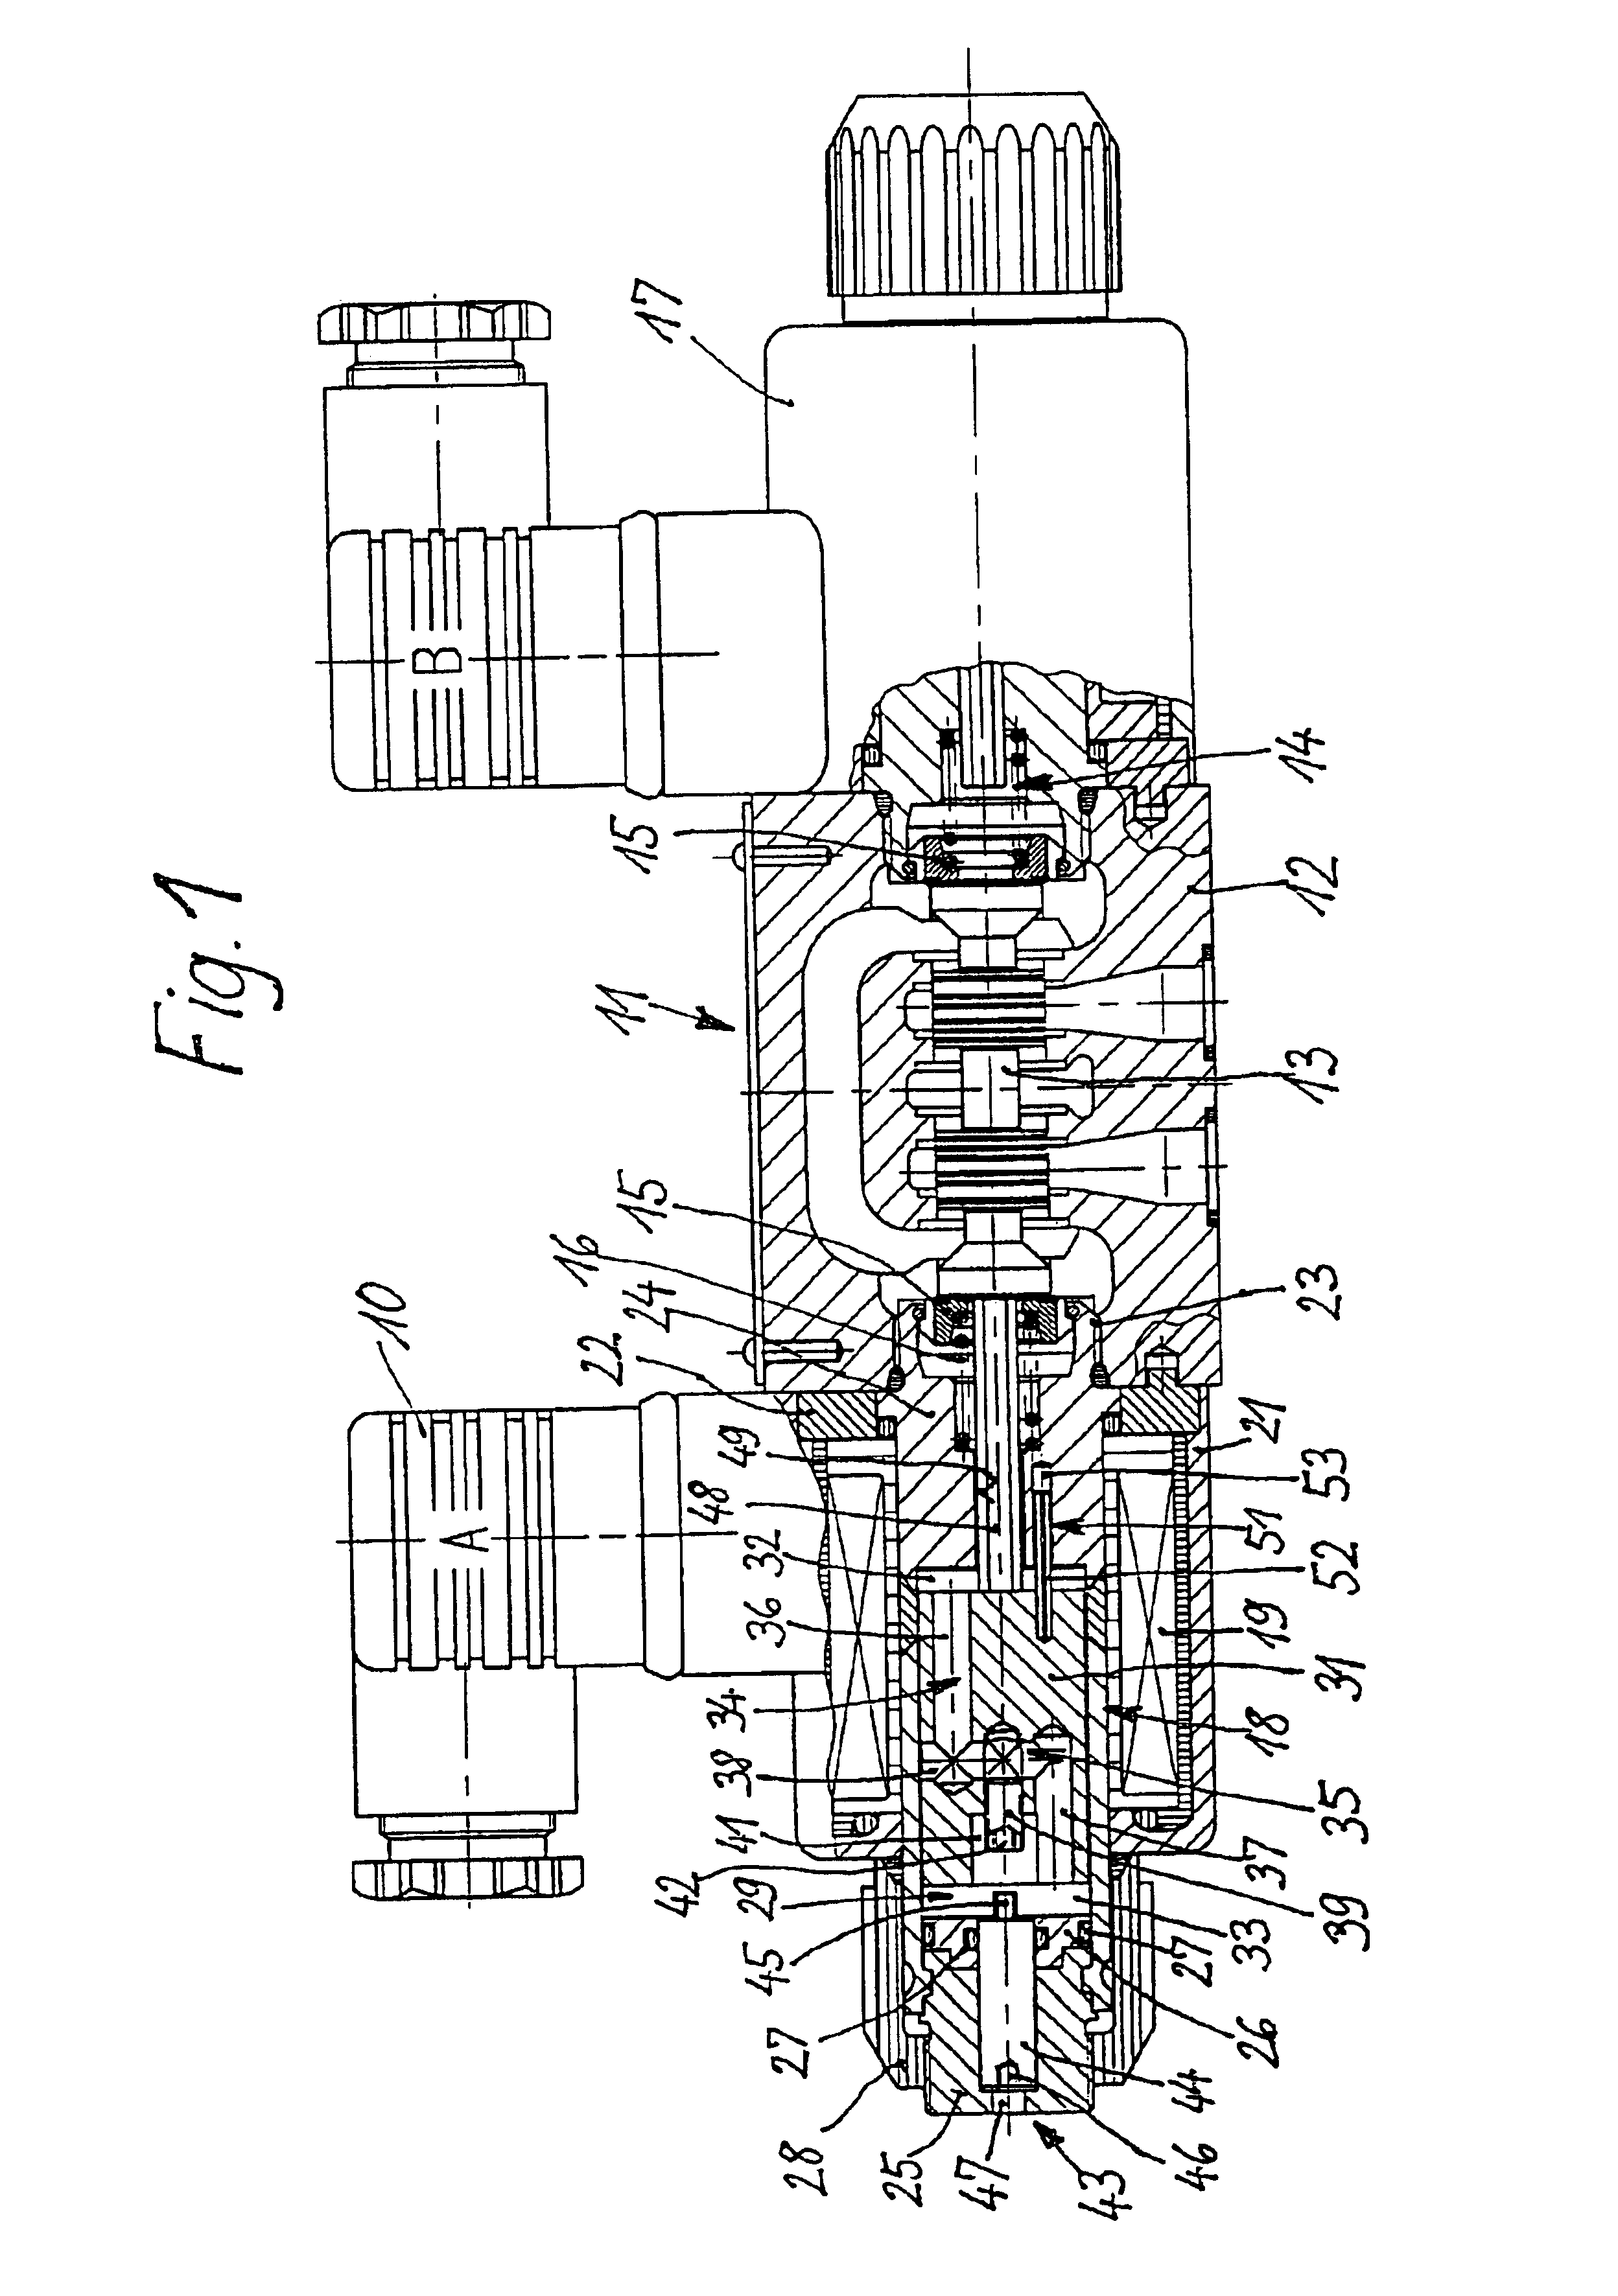 Electromagnet for actuating a hydraulic valve